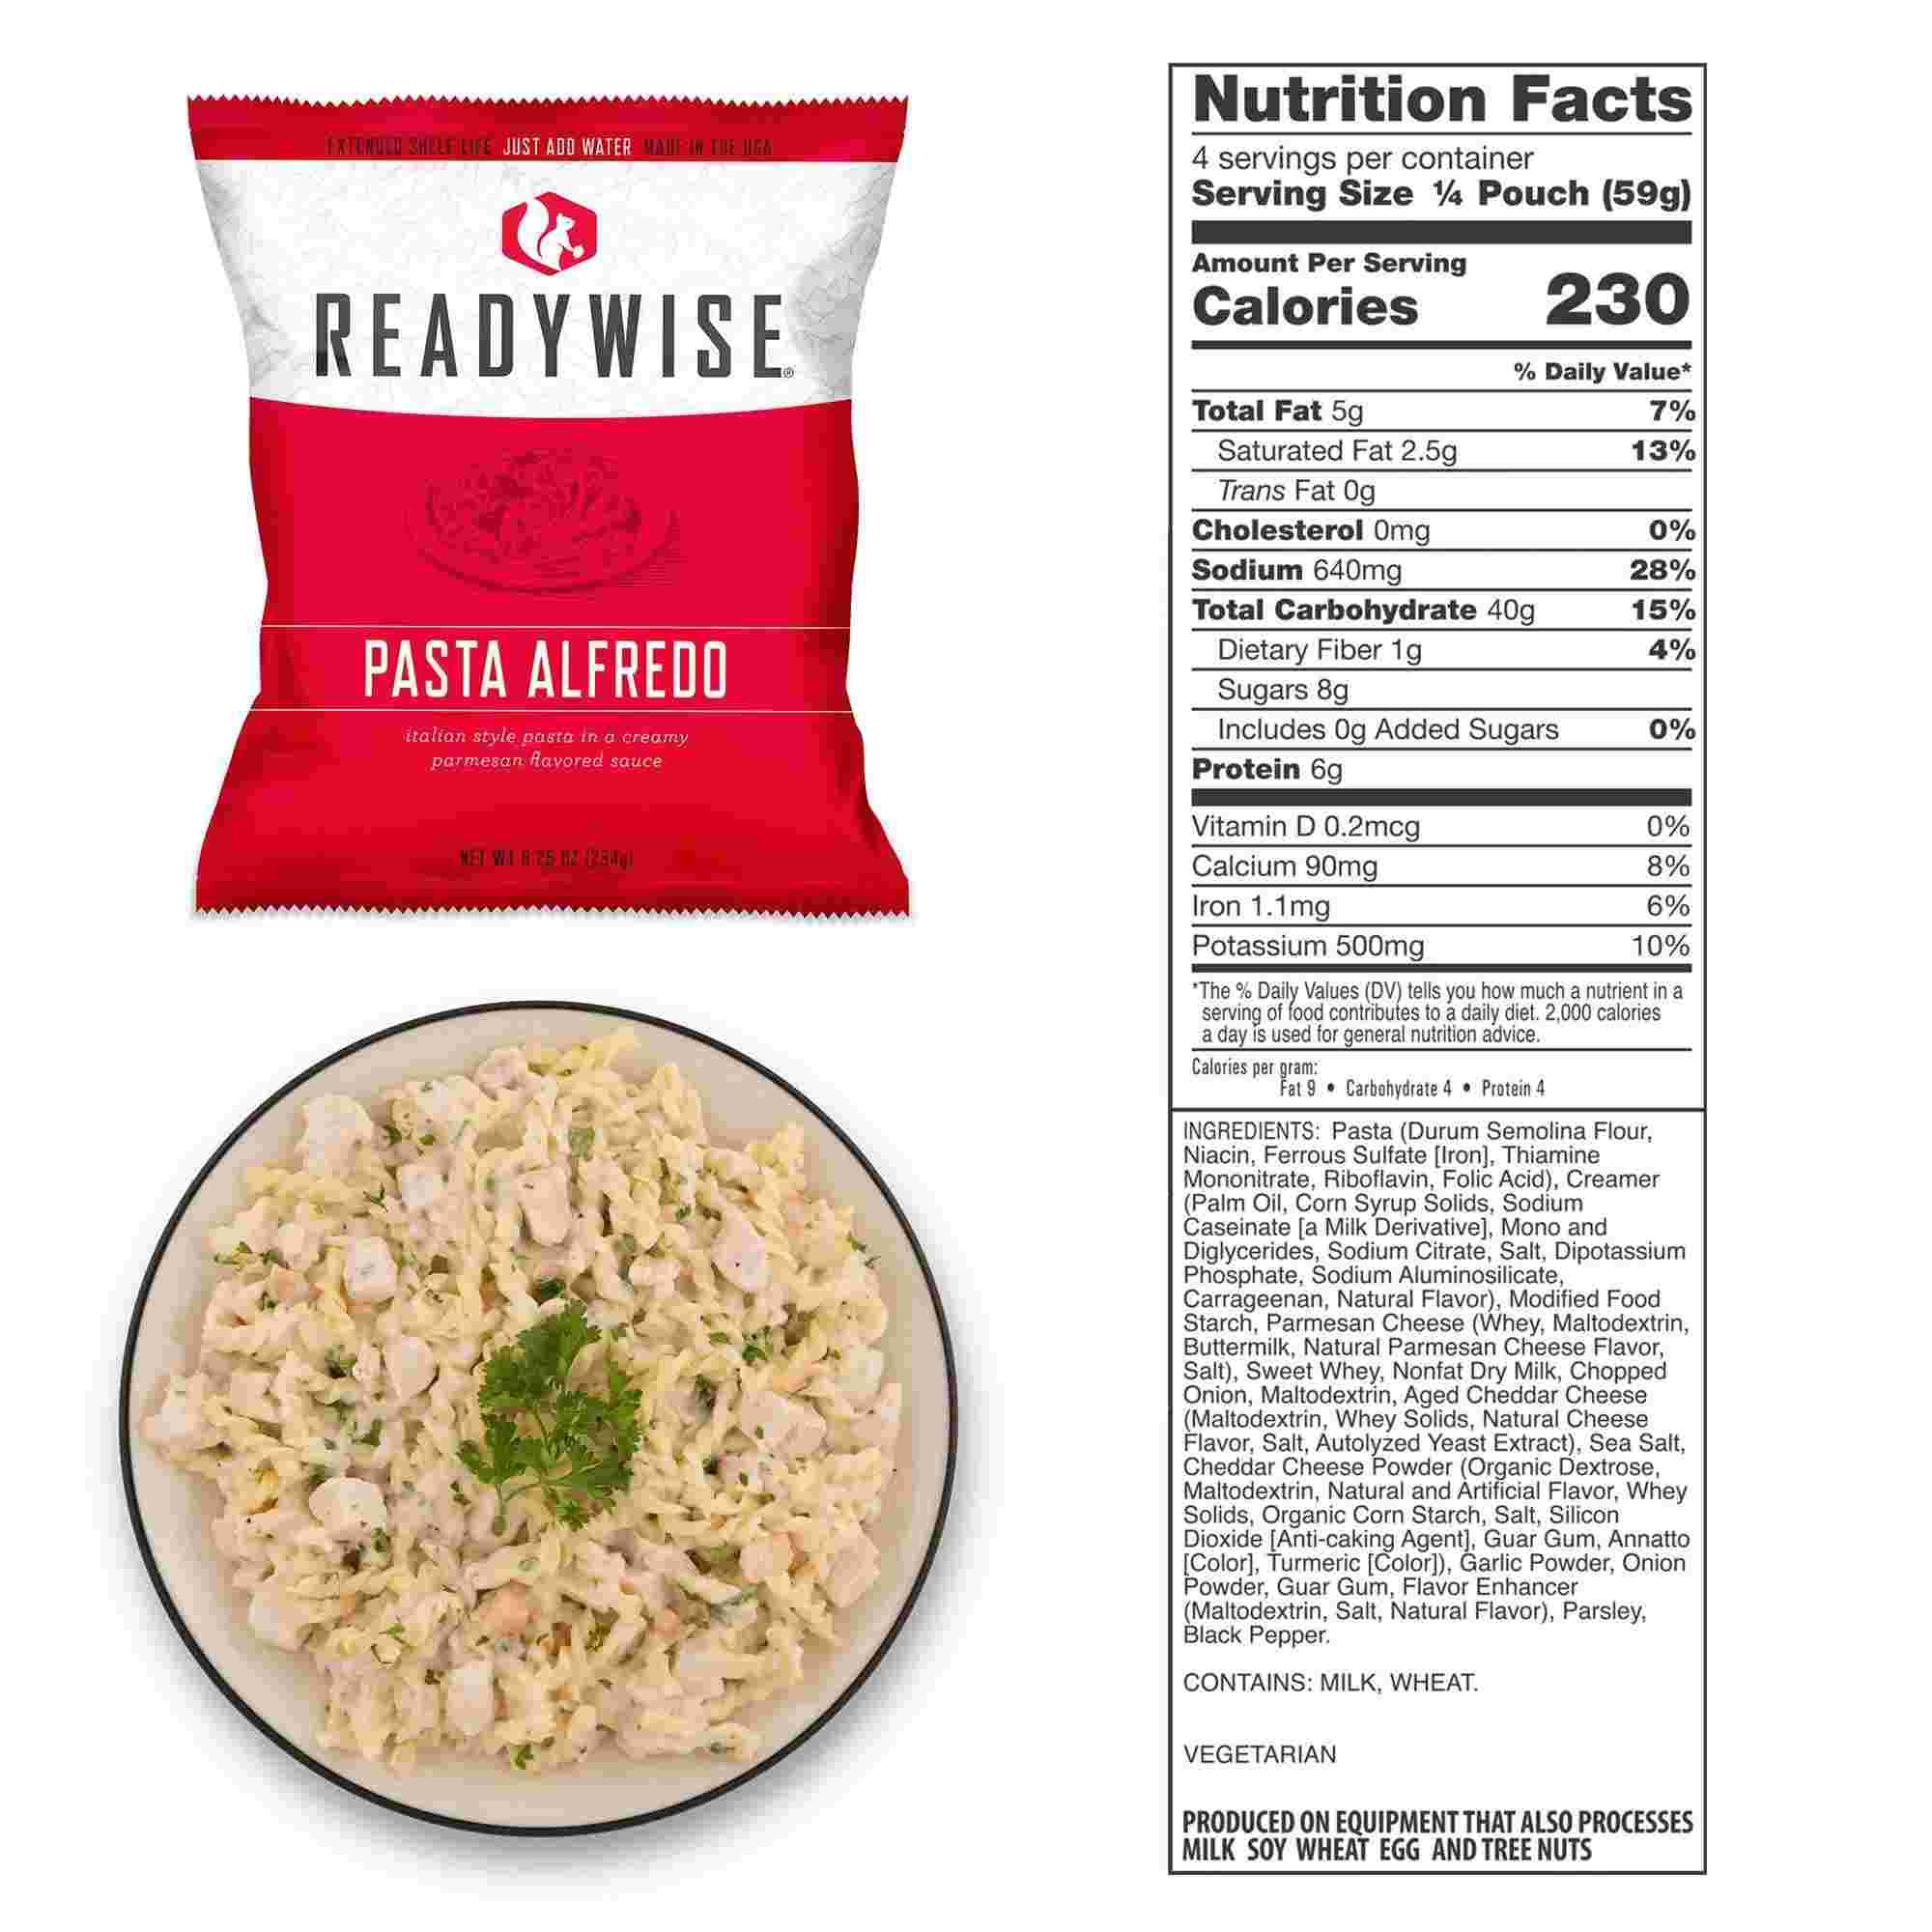 ReadyWise Emergency Food Supply - 120 Serving Freeze-dried Entrée Meals- Wise Food Company - Premium Emergency Food Supply from ReadyWise - Just $299.99! Shop now at Prepared Bee